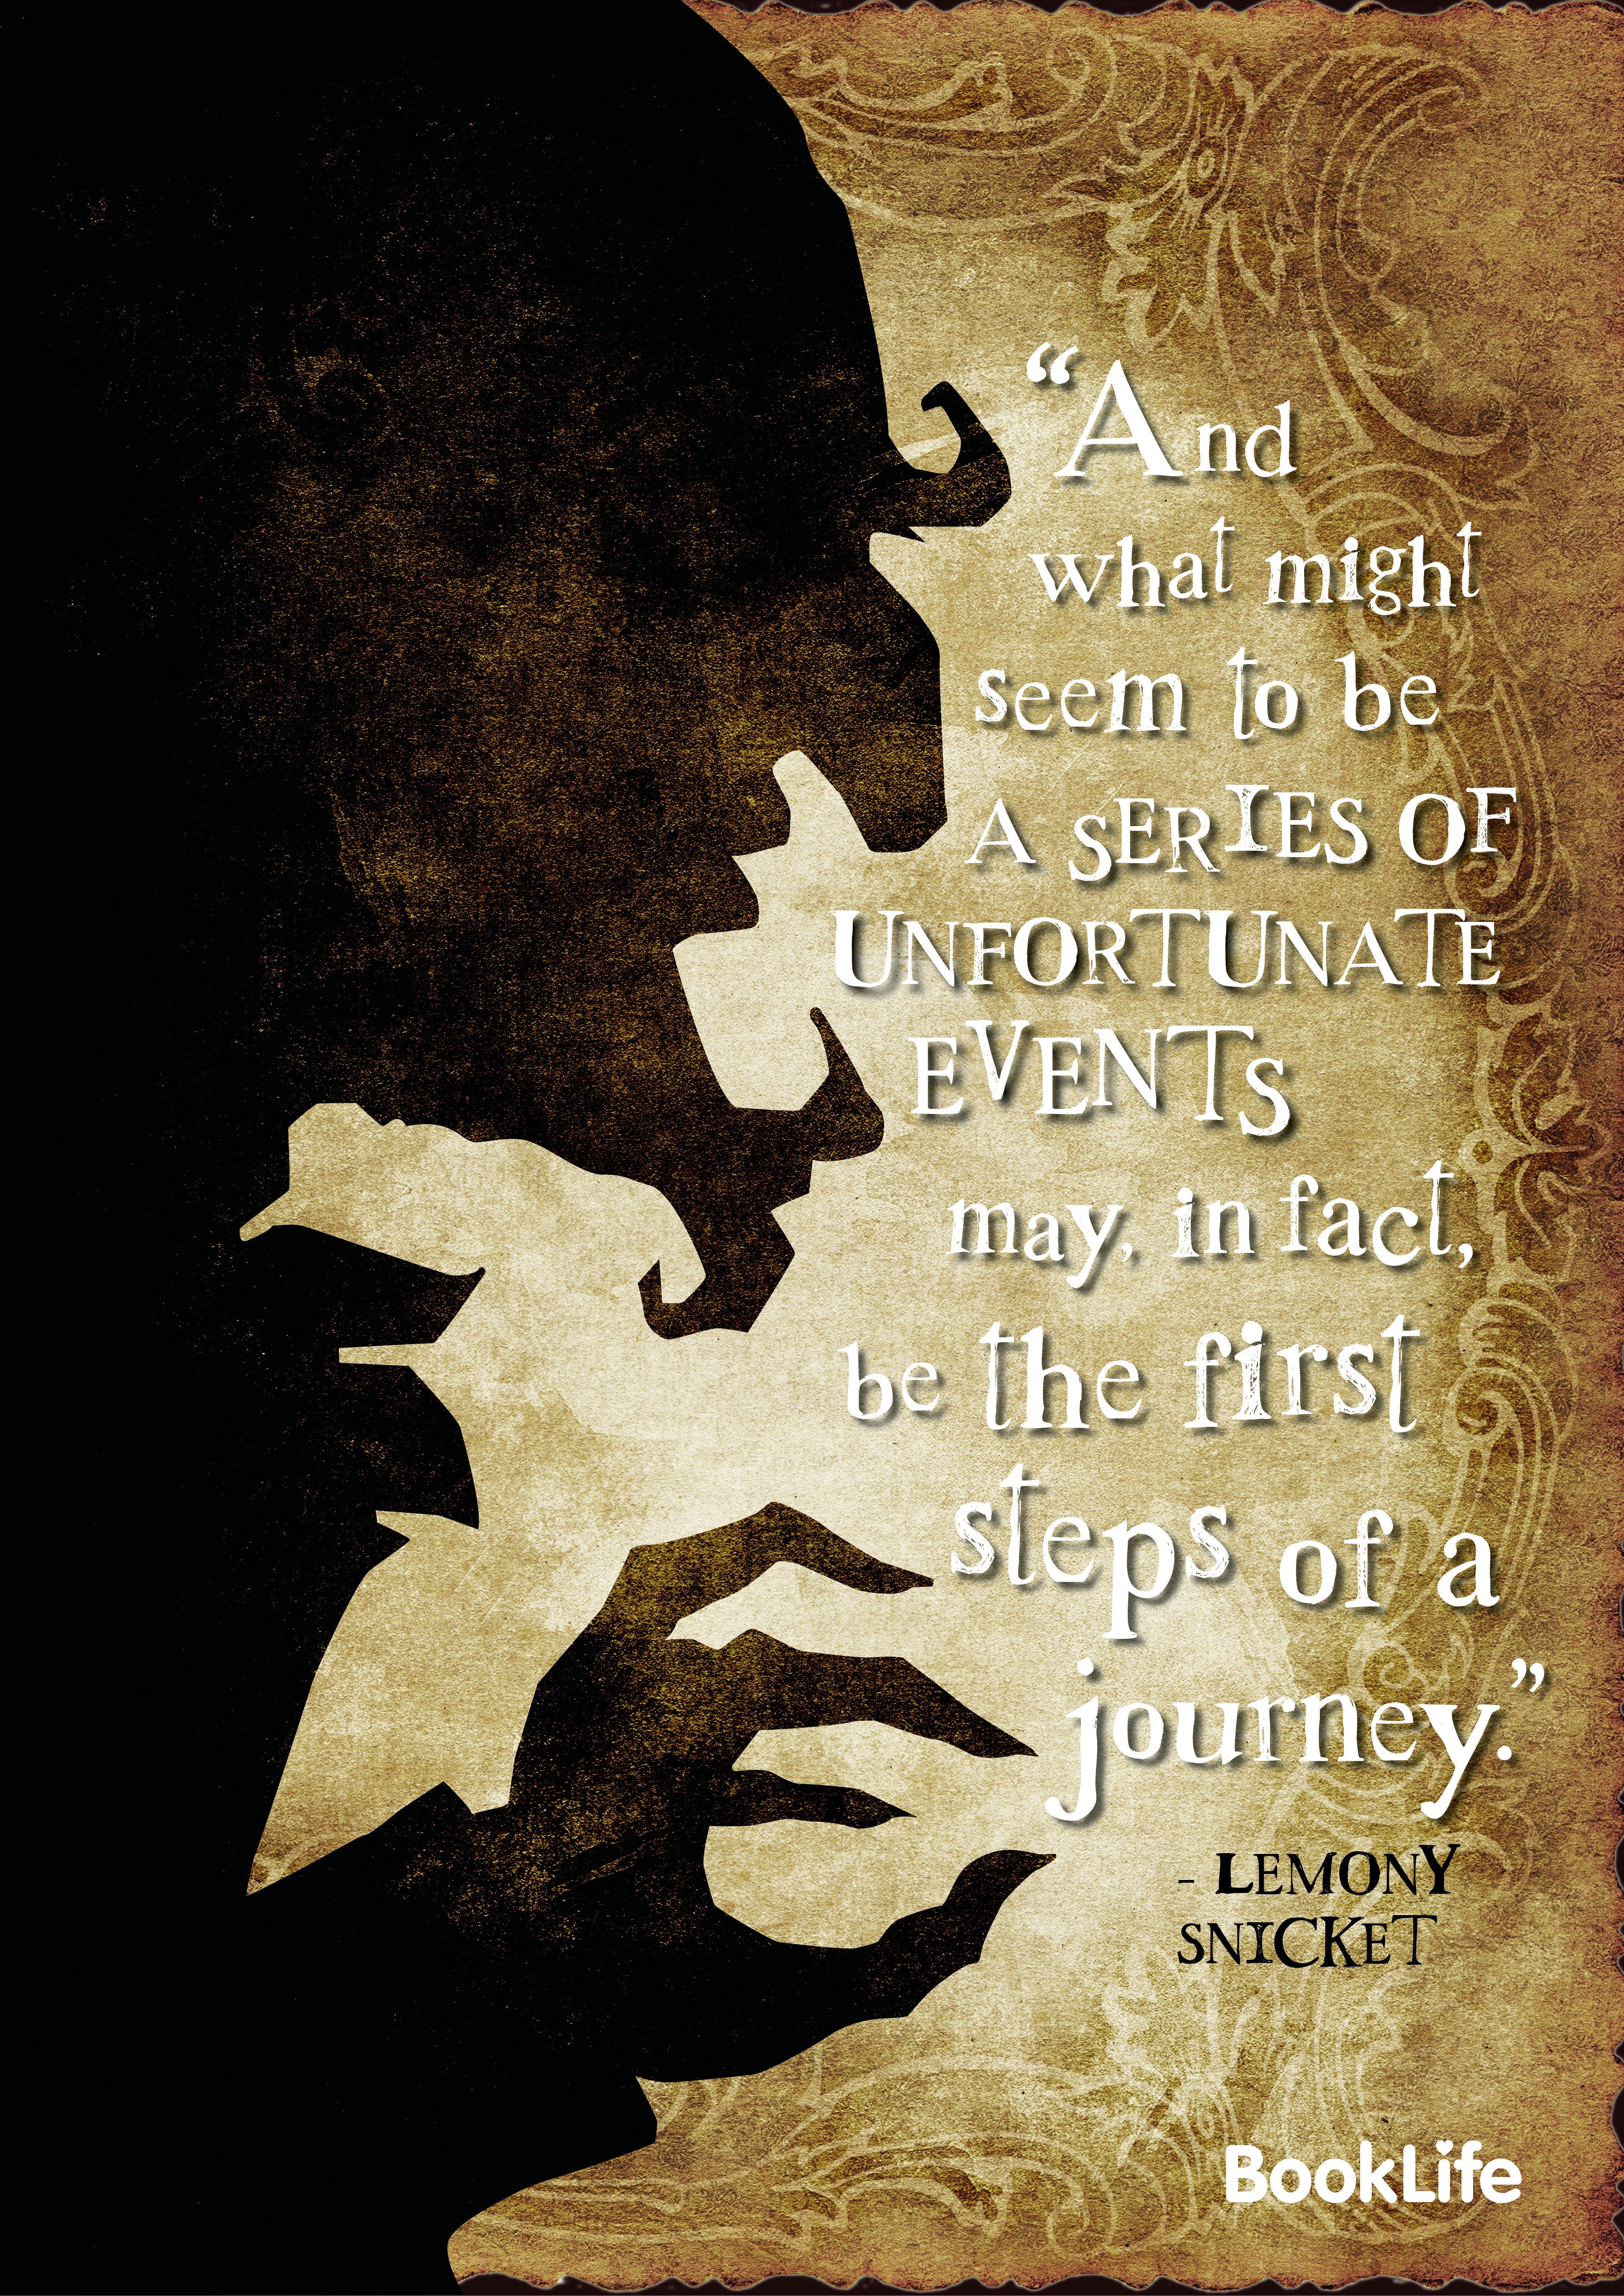 Free Lemony Snicket 'A Series of Unfortunate Events' Poster by BookLife